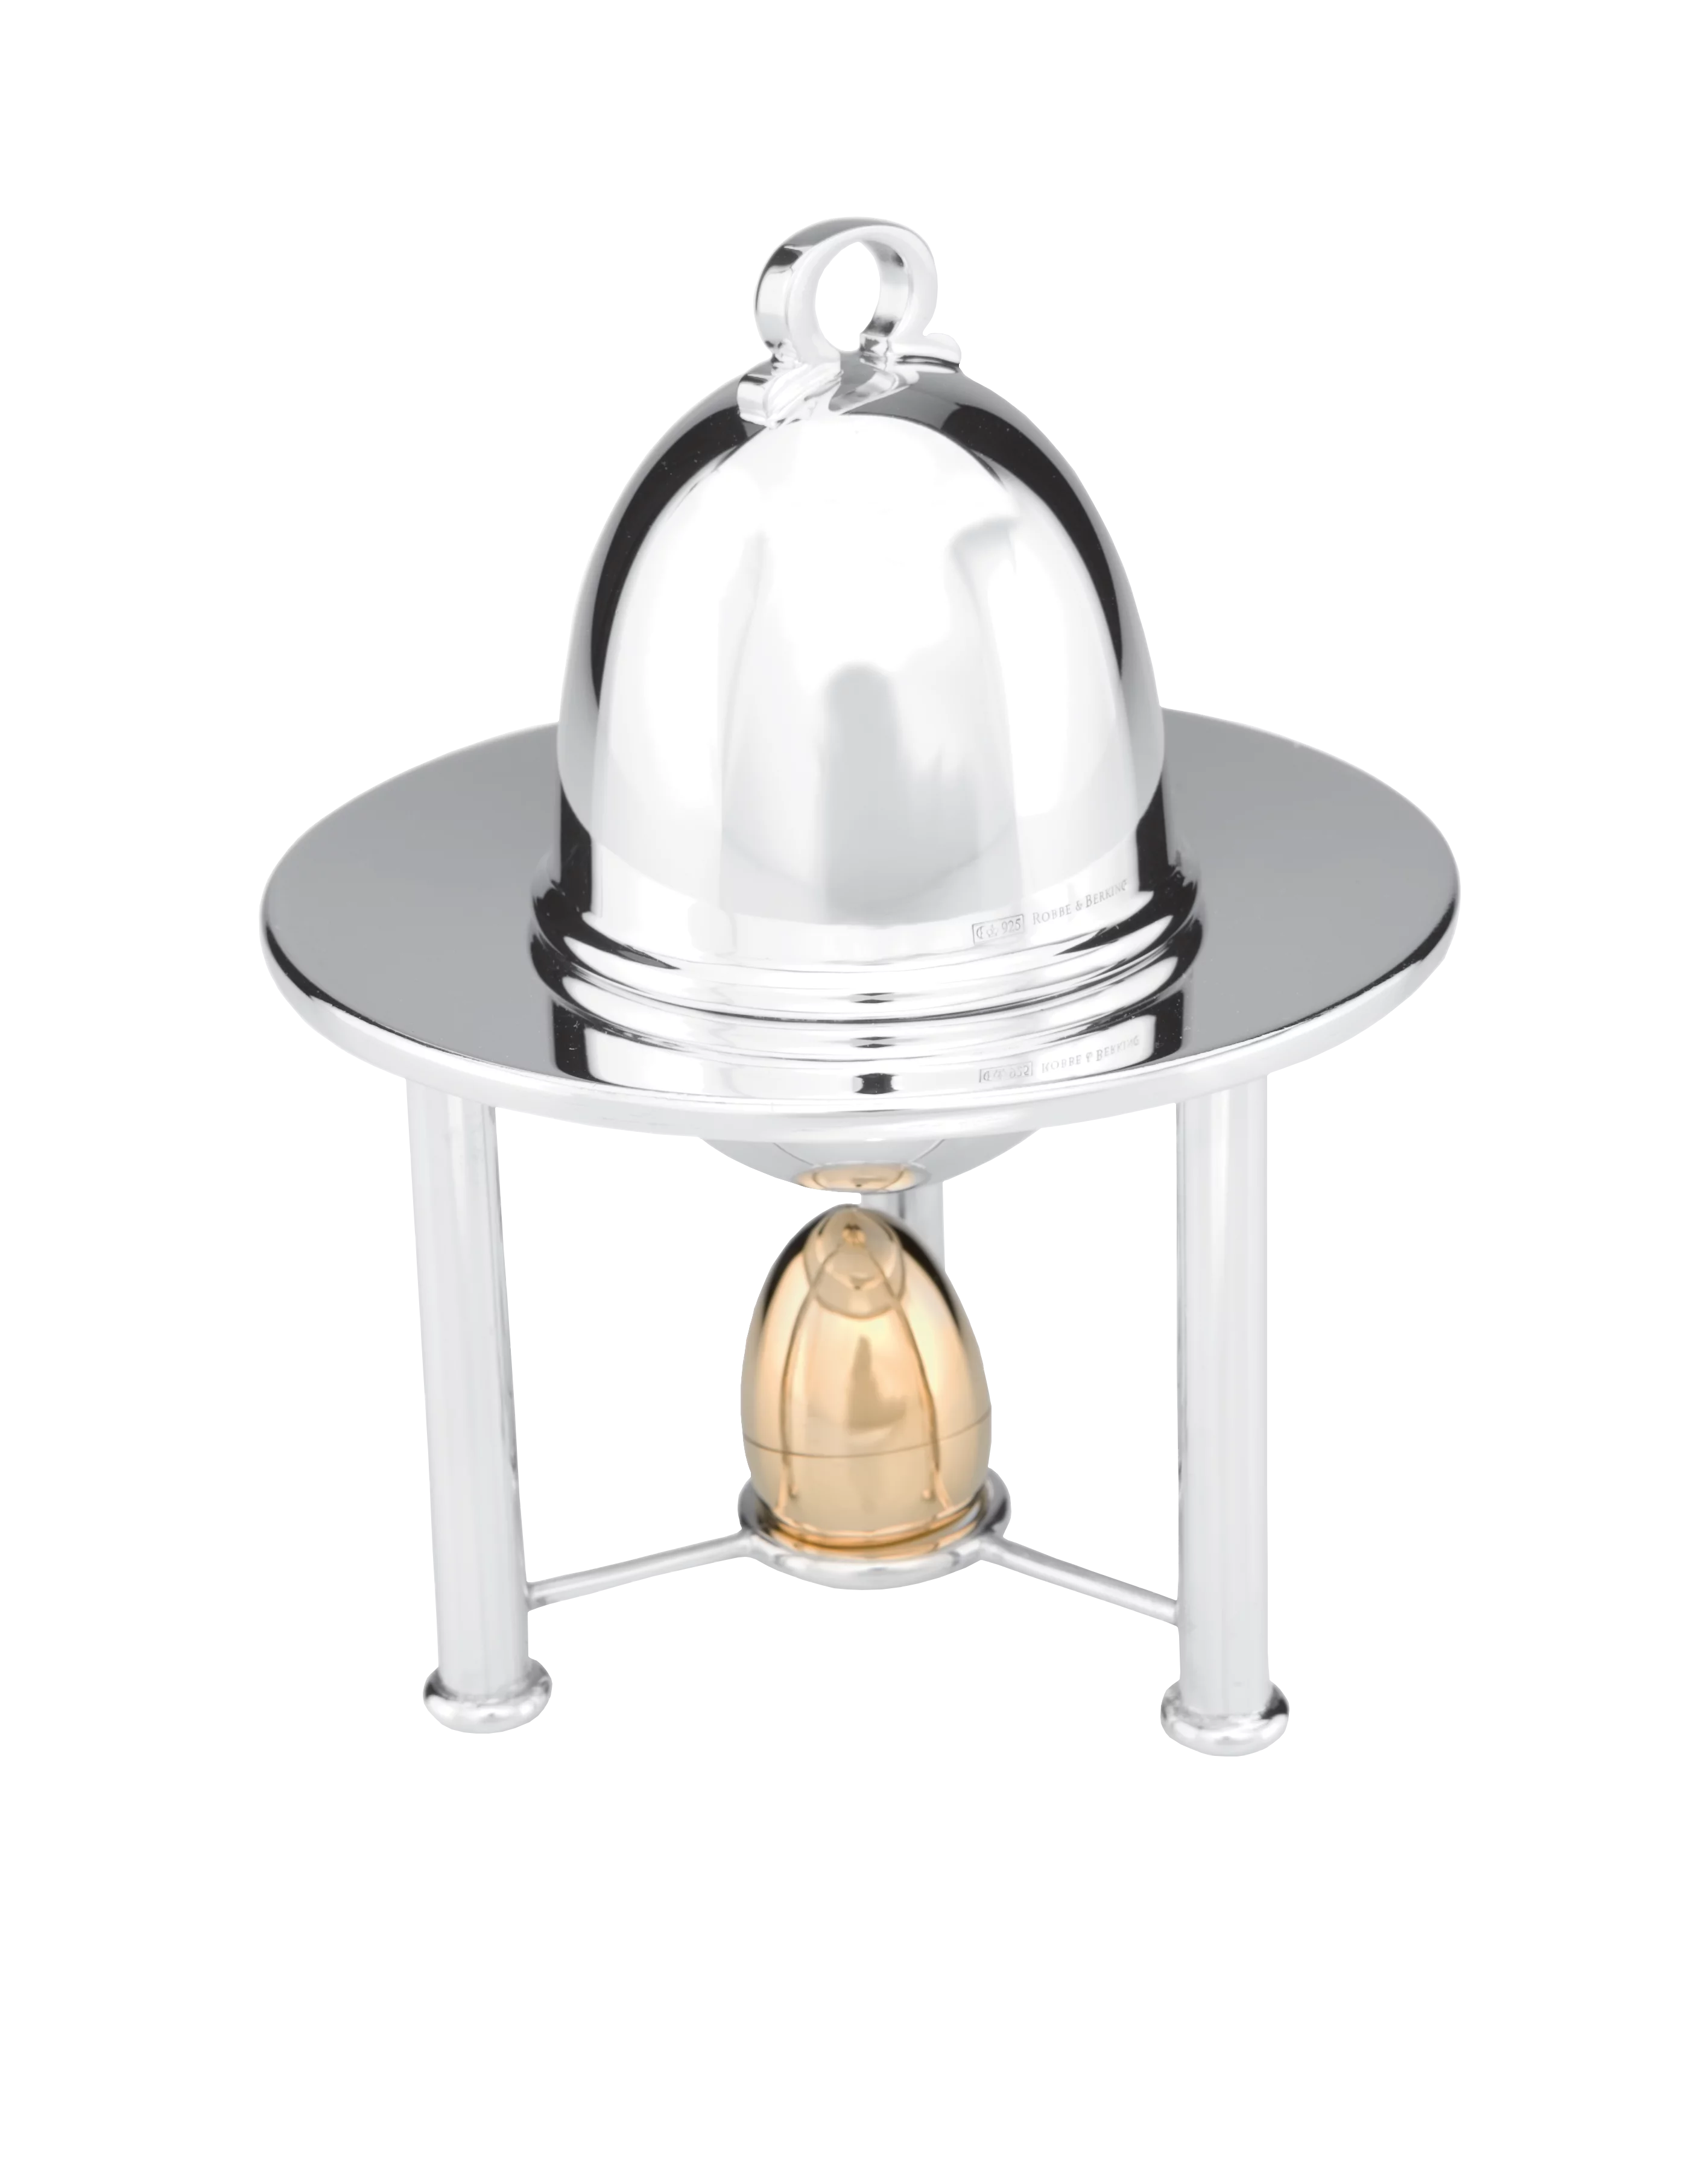 Covered Egg-Cloche with Salt Shaker (925 Sterling Silver)